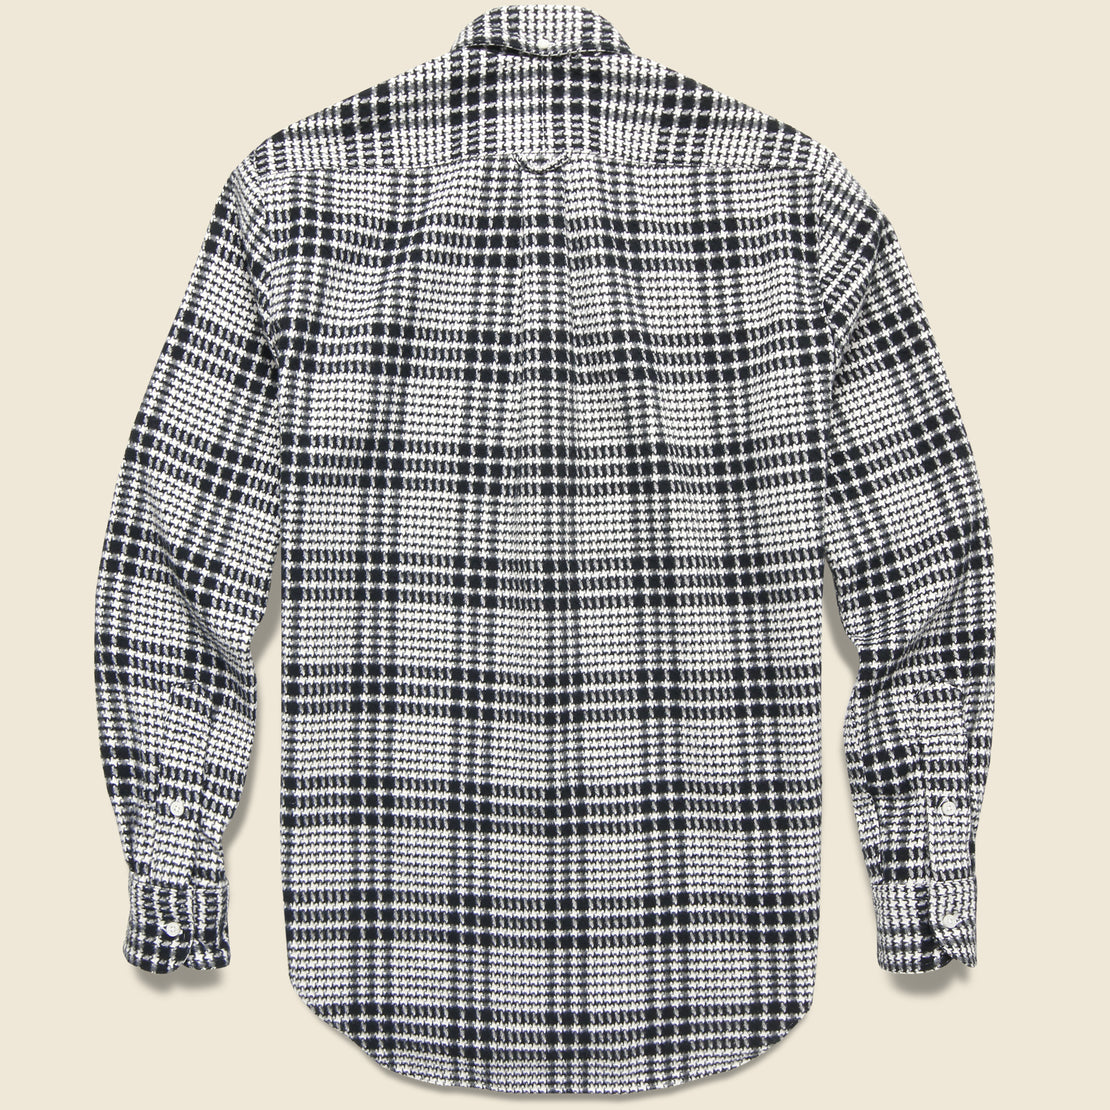 Large Houndstooth Check Shirt - Black - Gitman Vintage - STAG Provisions - Tops - L/S Woven - Plaid